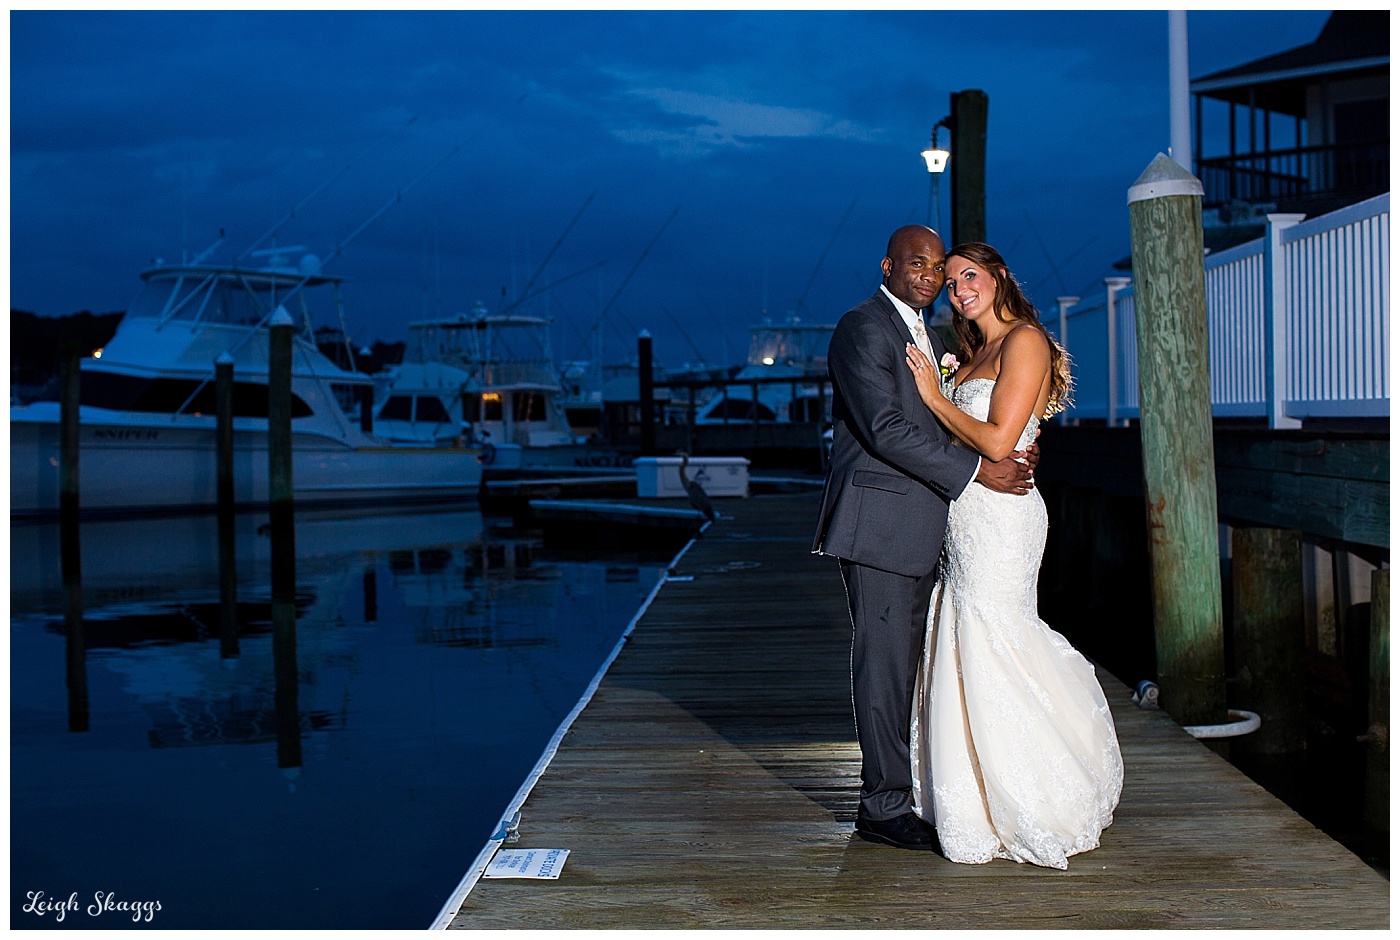 Jessica & Oliver are Married!!  A sneak peek of their Water Table wedding!  